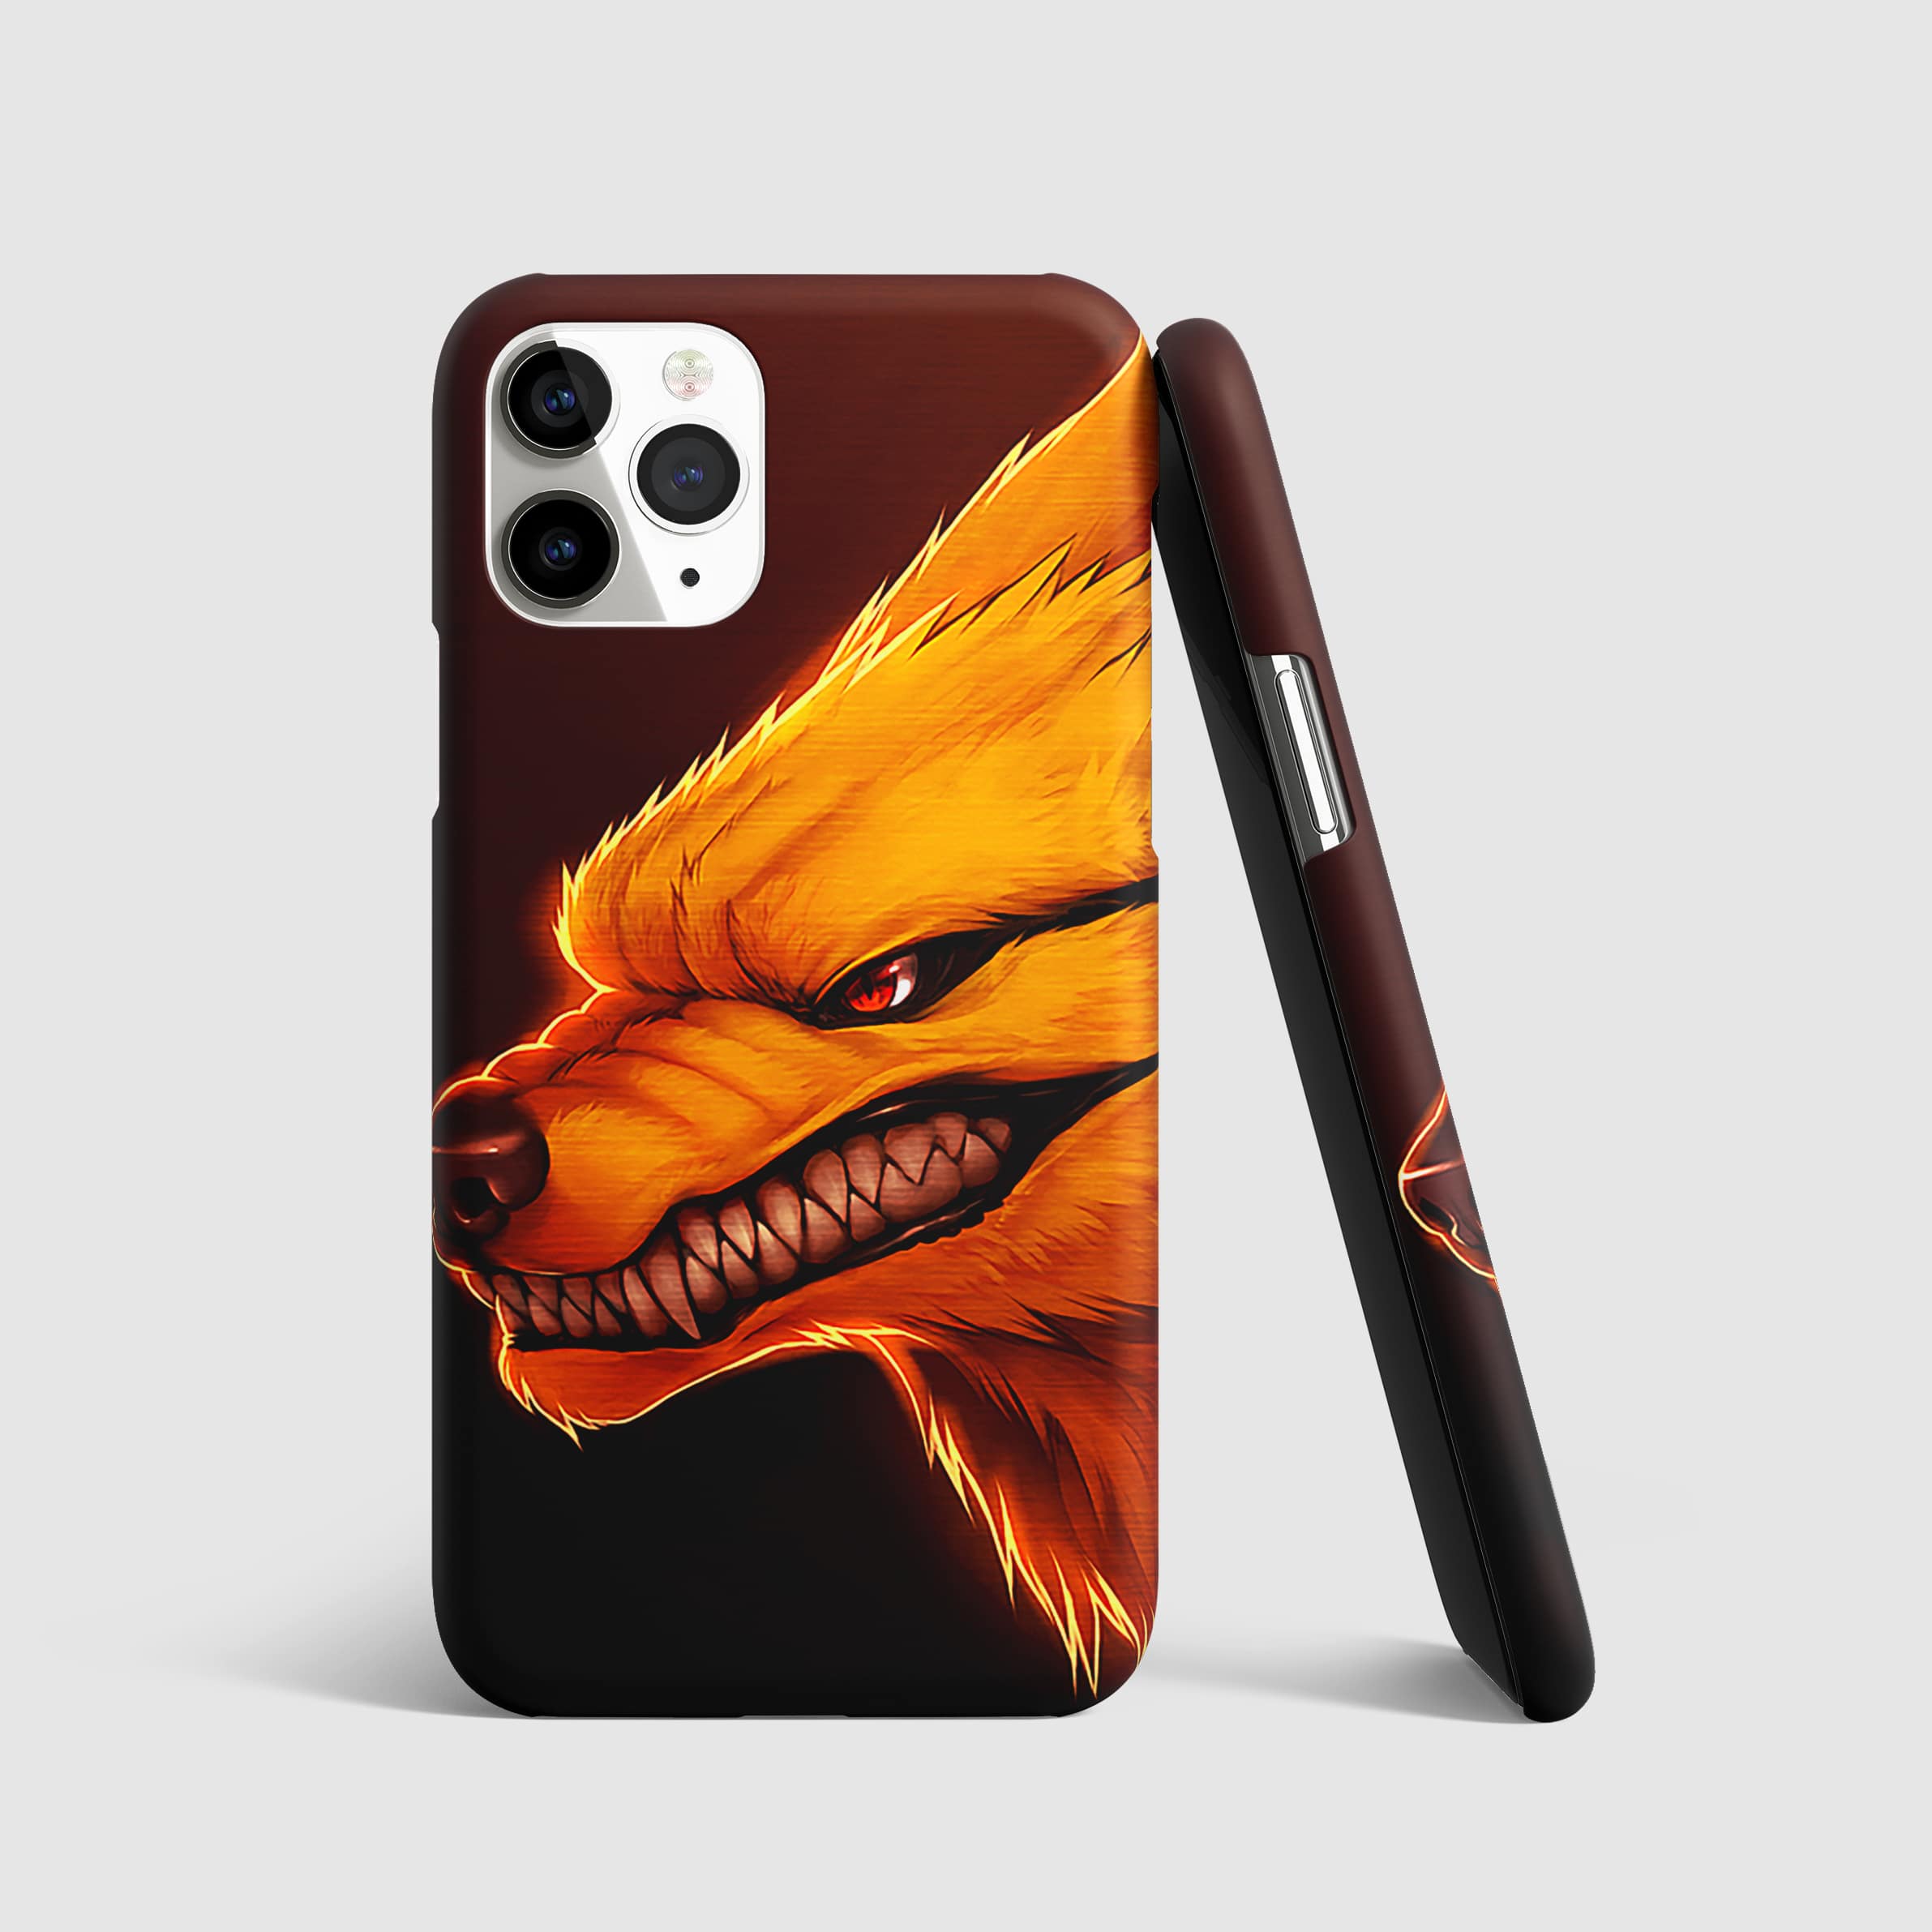 Nine Tailed Fox Phone Cover with 3D matte finish, featuring detailed Kurama design.